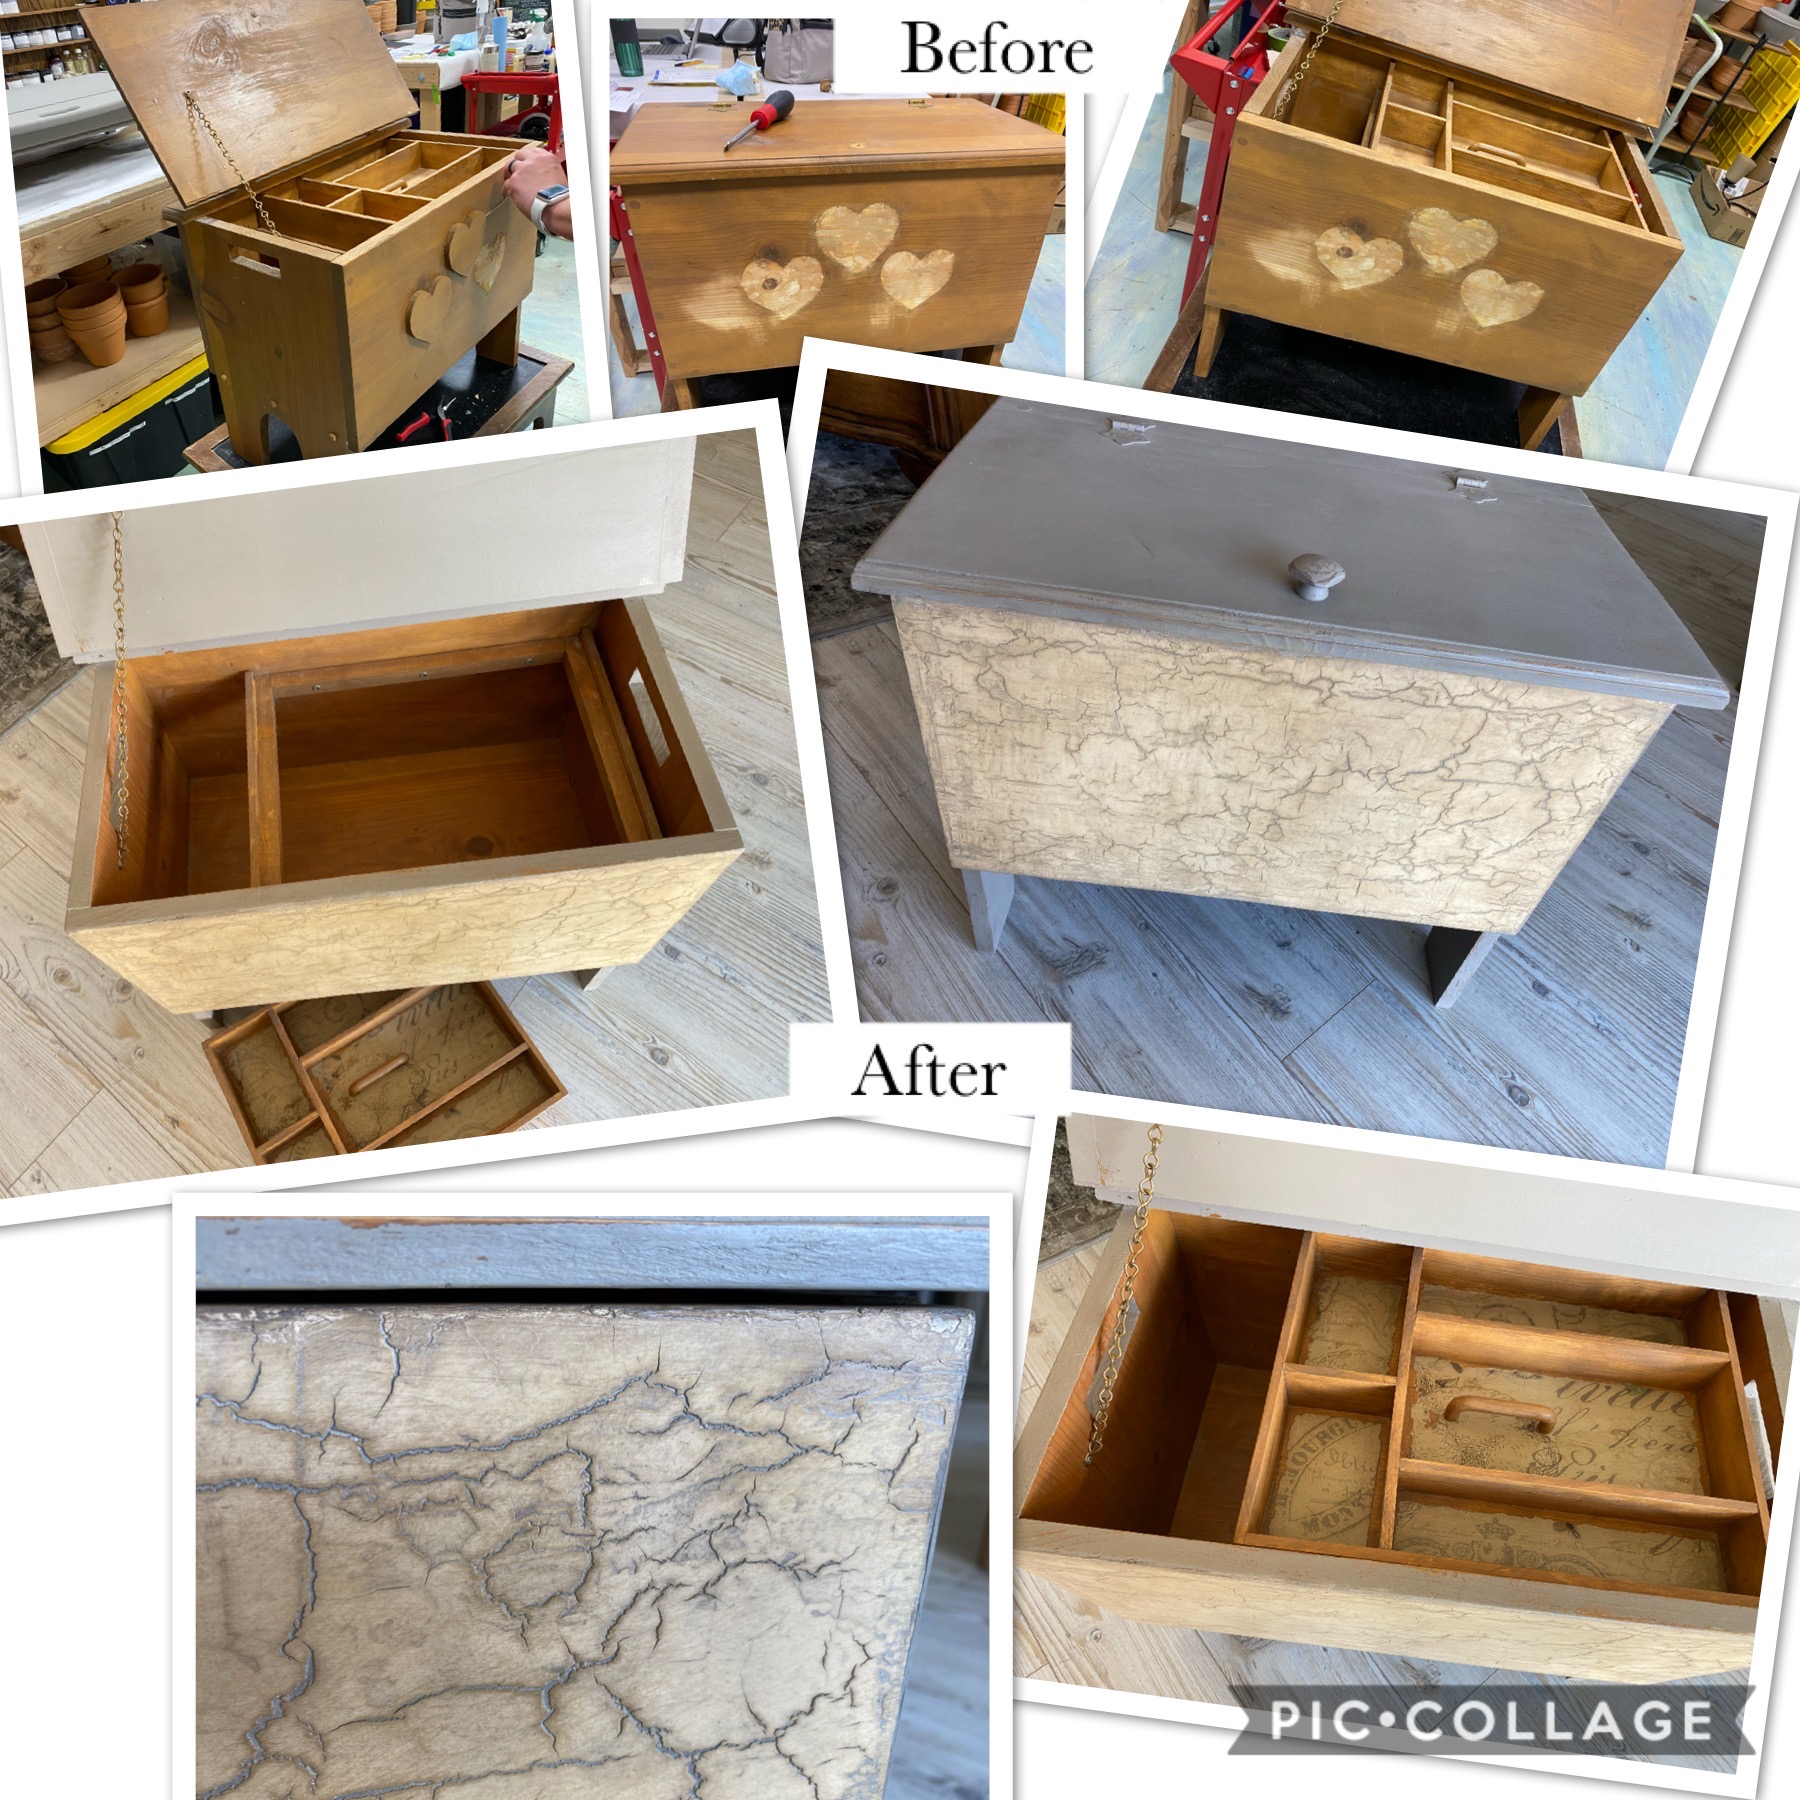 Pine Sewing Box with Plaster